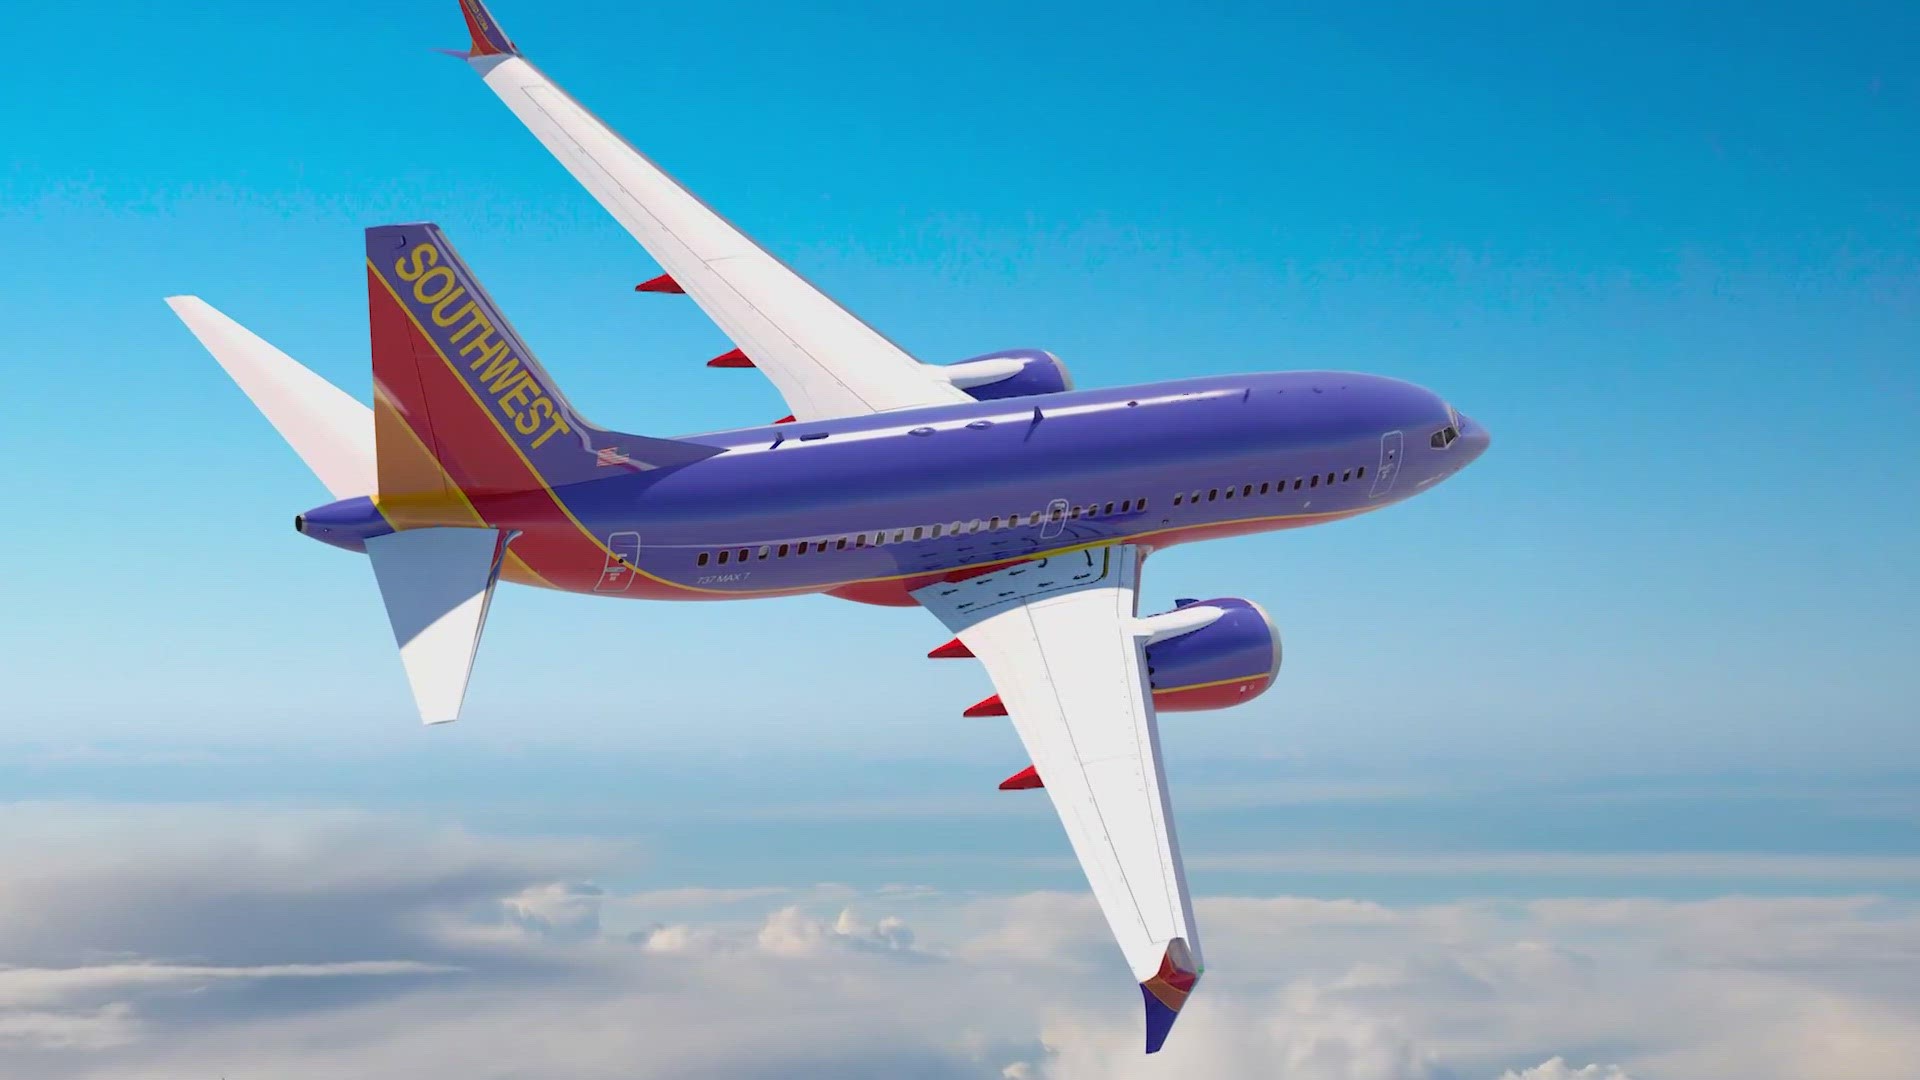 For the first quarter, Southwest now foresees operating revenue per available seat mile being flat to up 2%.